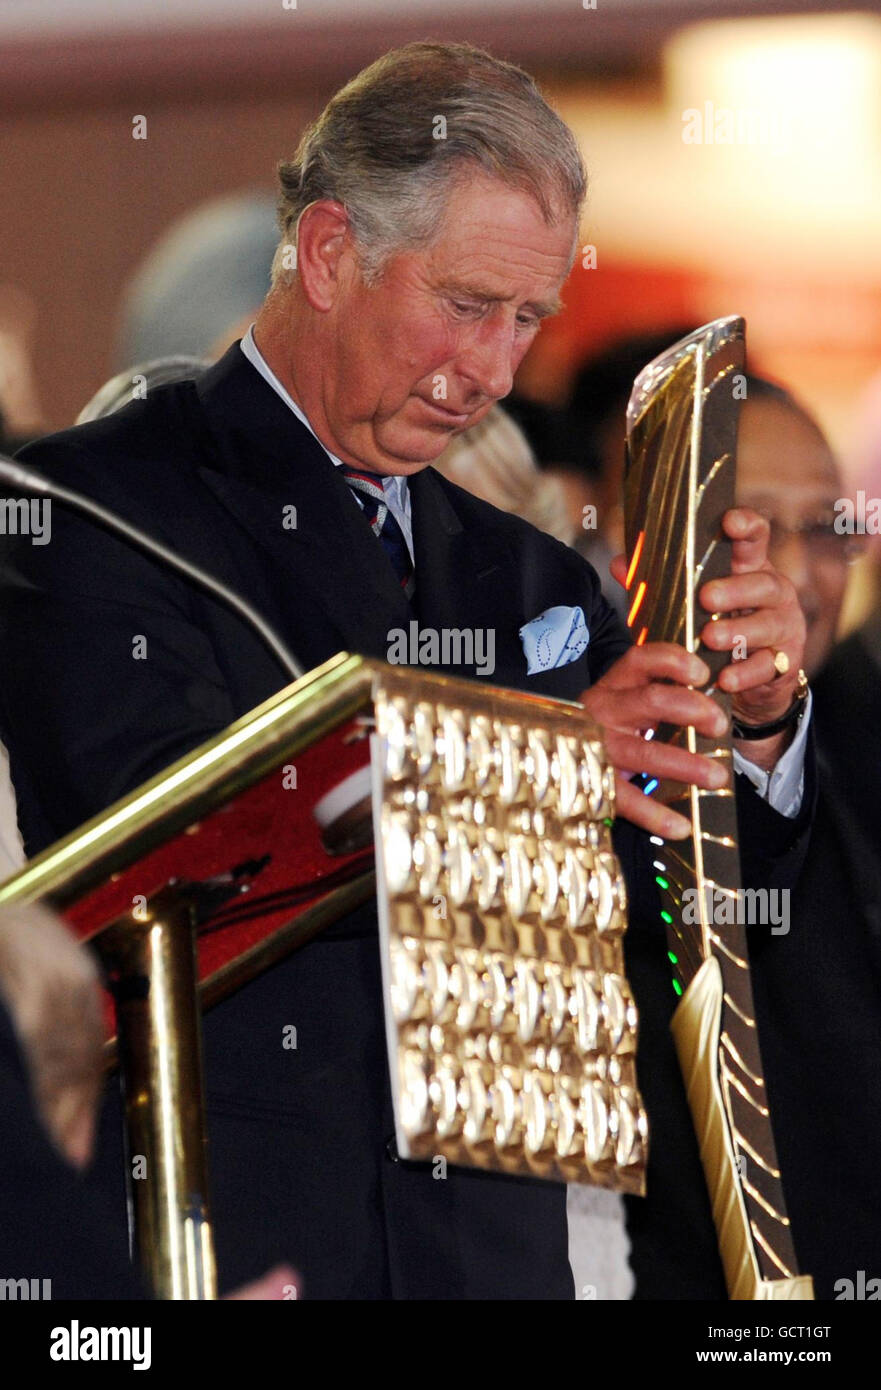 The Prince of Wales receives the Queen's baton and reads a message from Britain's Queen Elizabeth II to announce the opening of the 2010 Commonwealth Games in New Delhi, India. Stock Photo